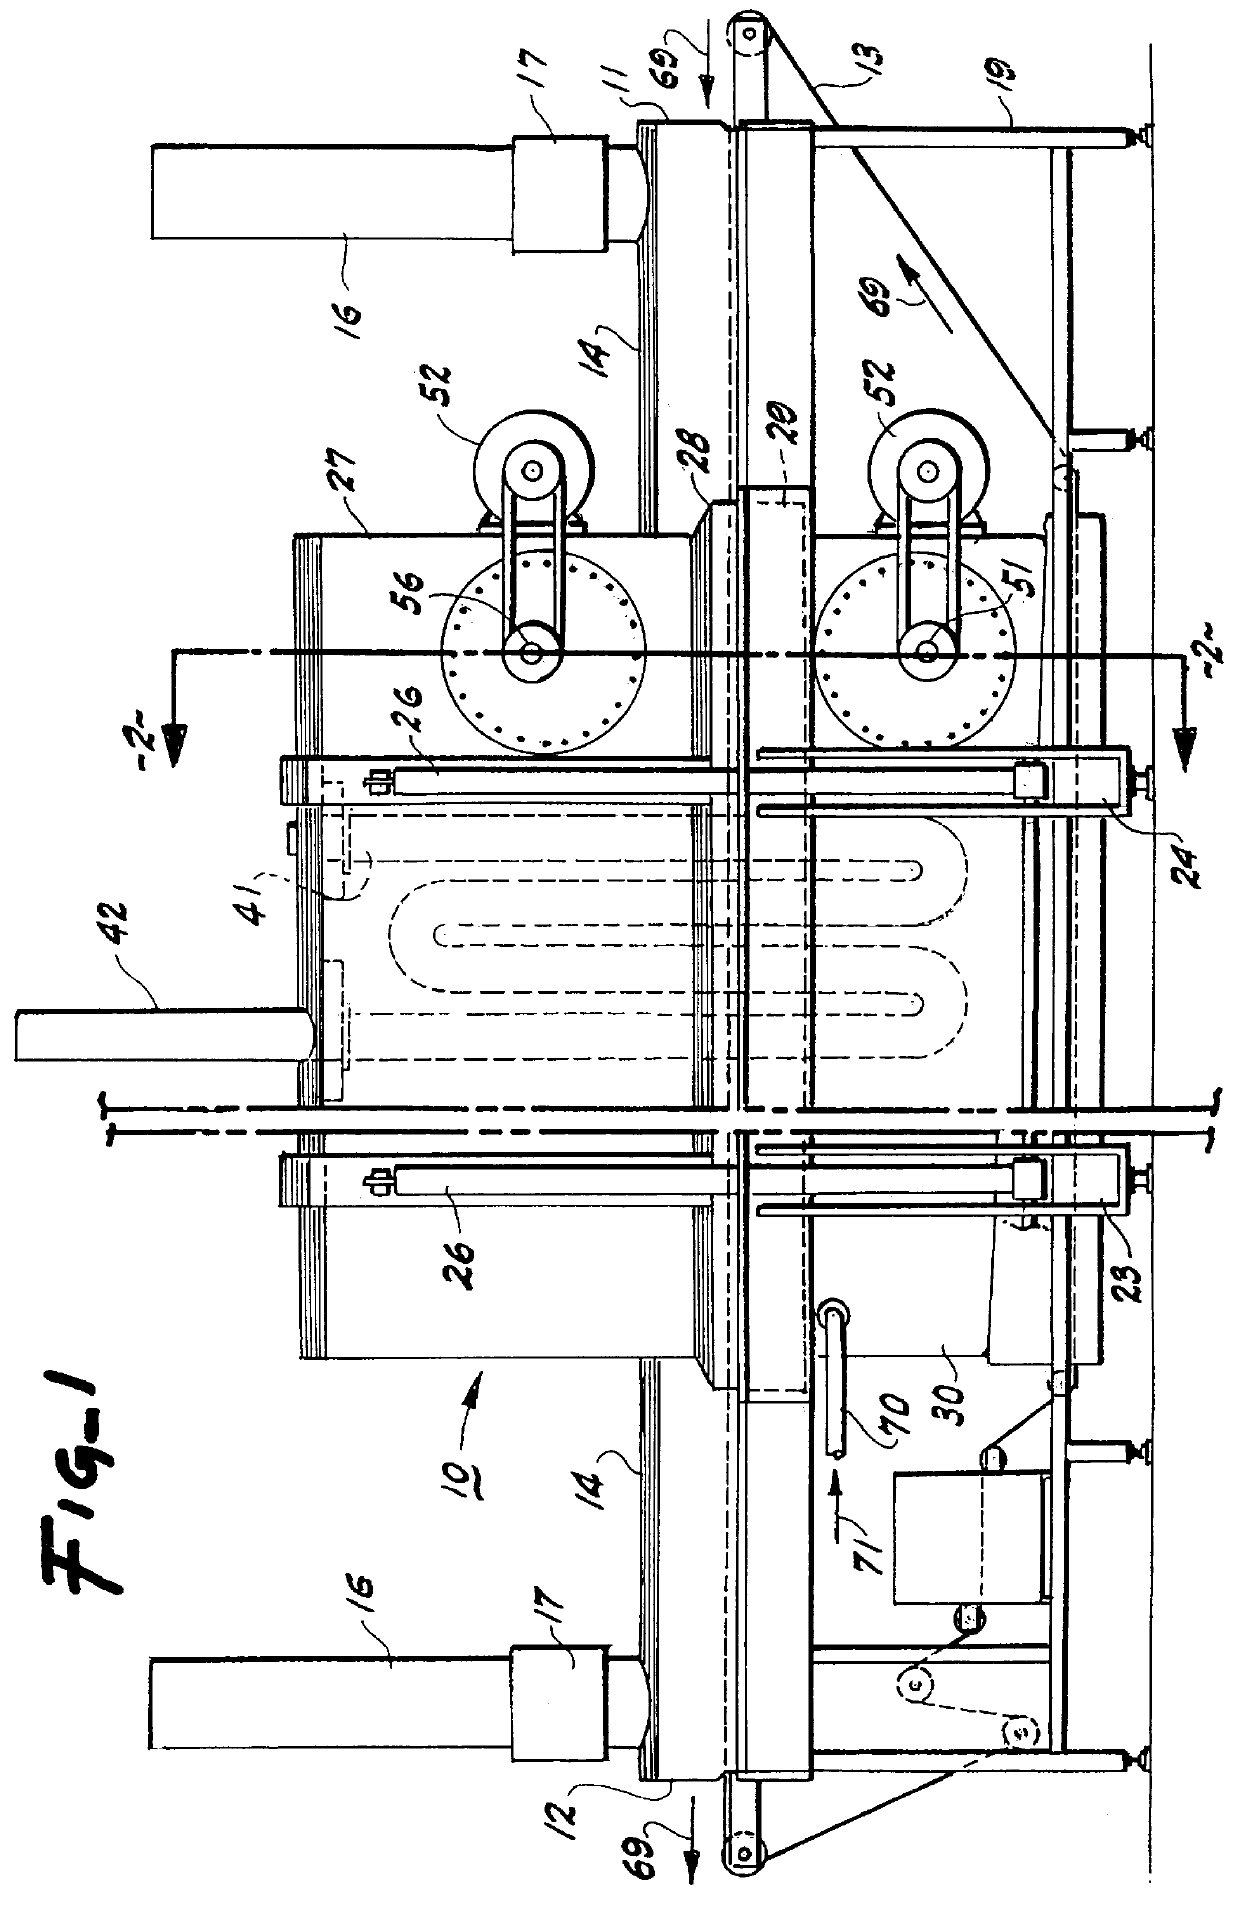 Method of cooking food products in an air impingement oven